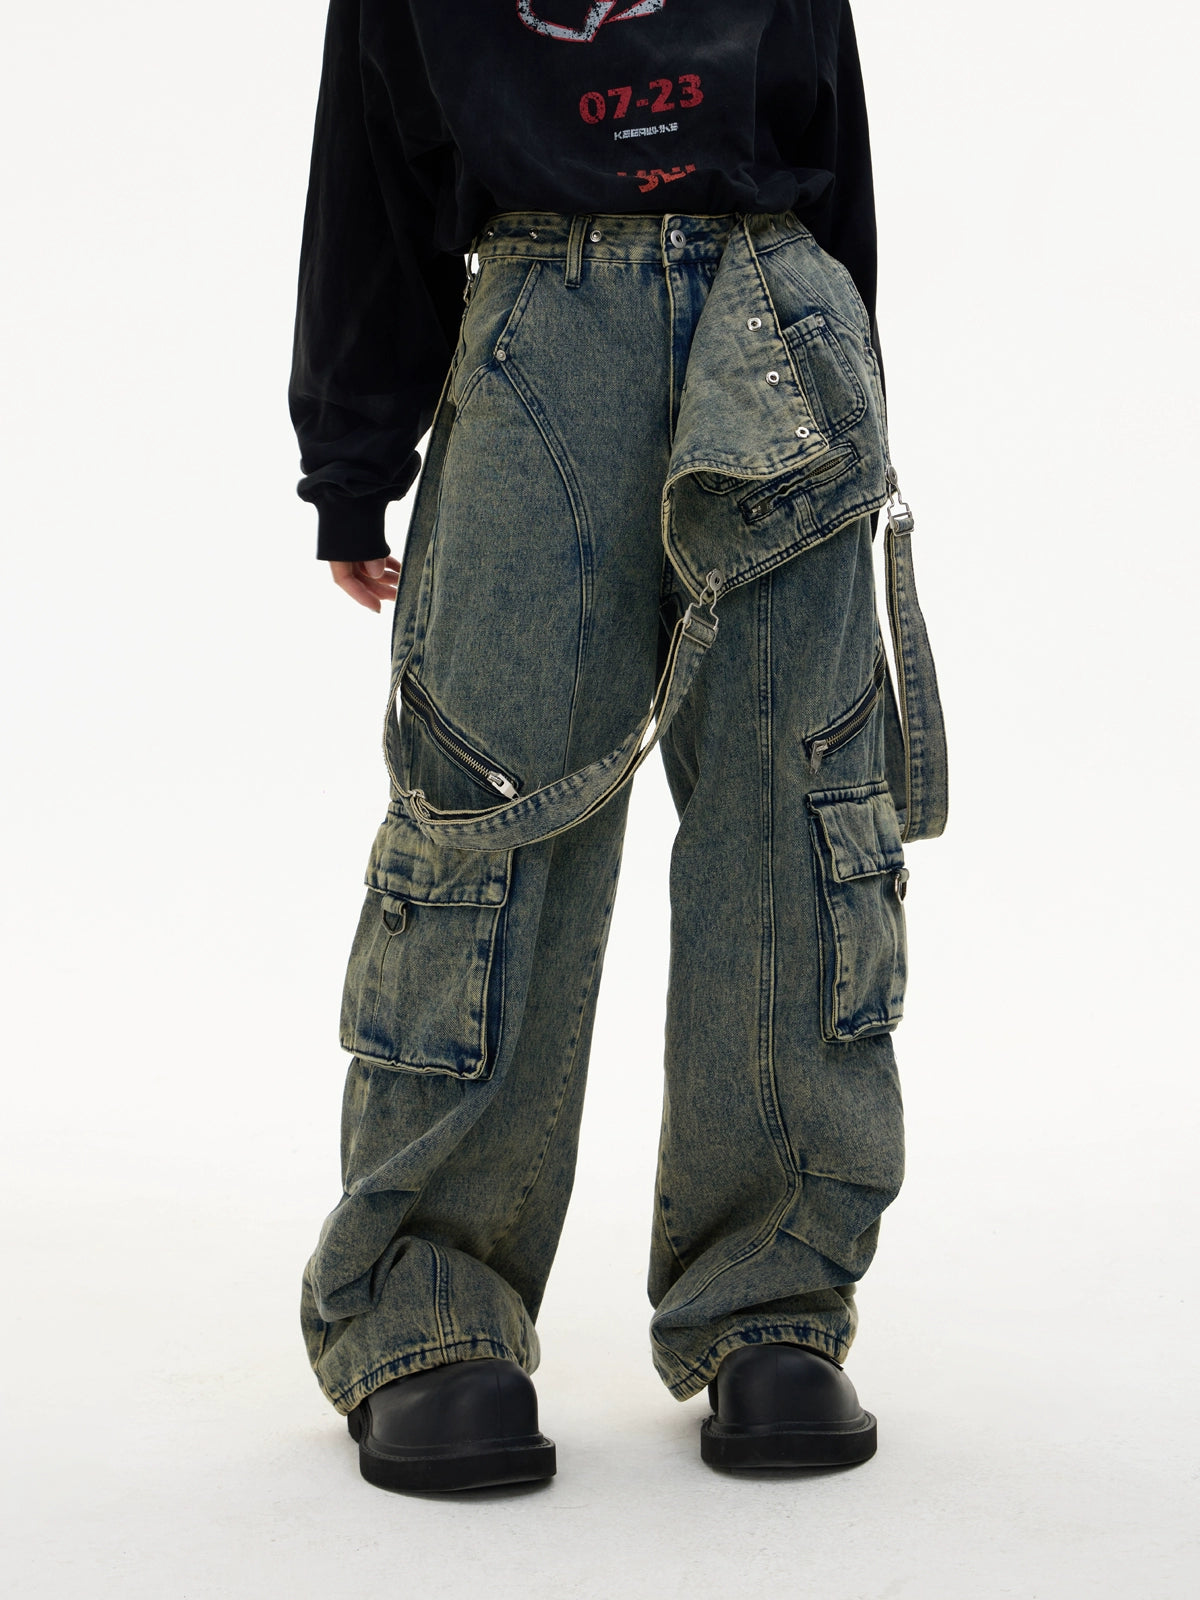 Distressed Overall Jeans